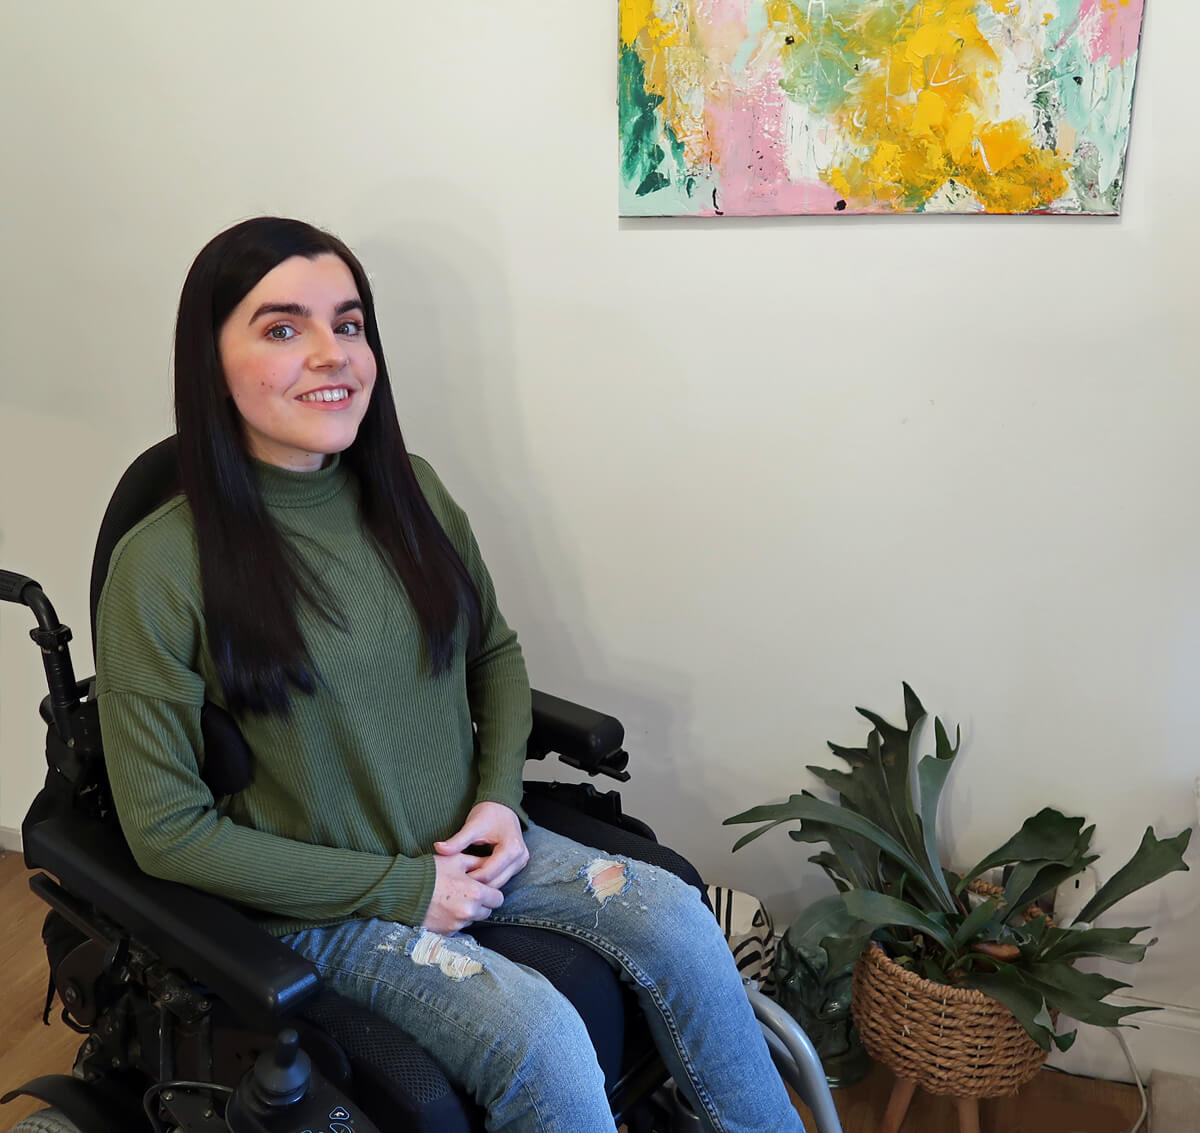 Emma sitting in her powered wheelchair. She has long dark hair. She is wearing a khaki coloured long sleeve top and blue jeans. Emma is smiling at the camera while sitting next to some plants.